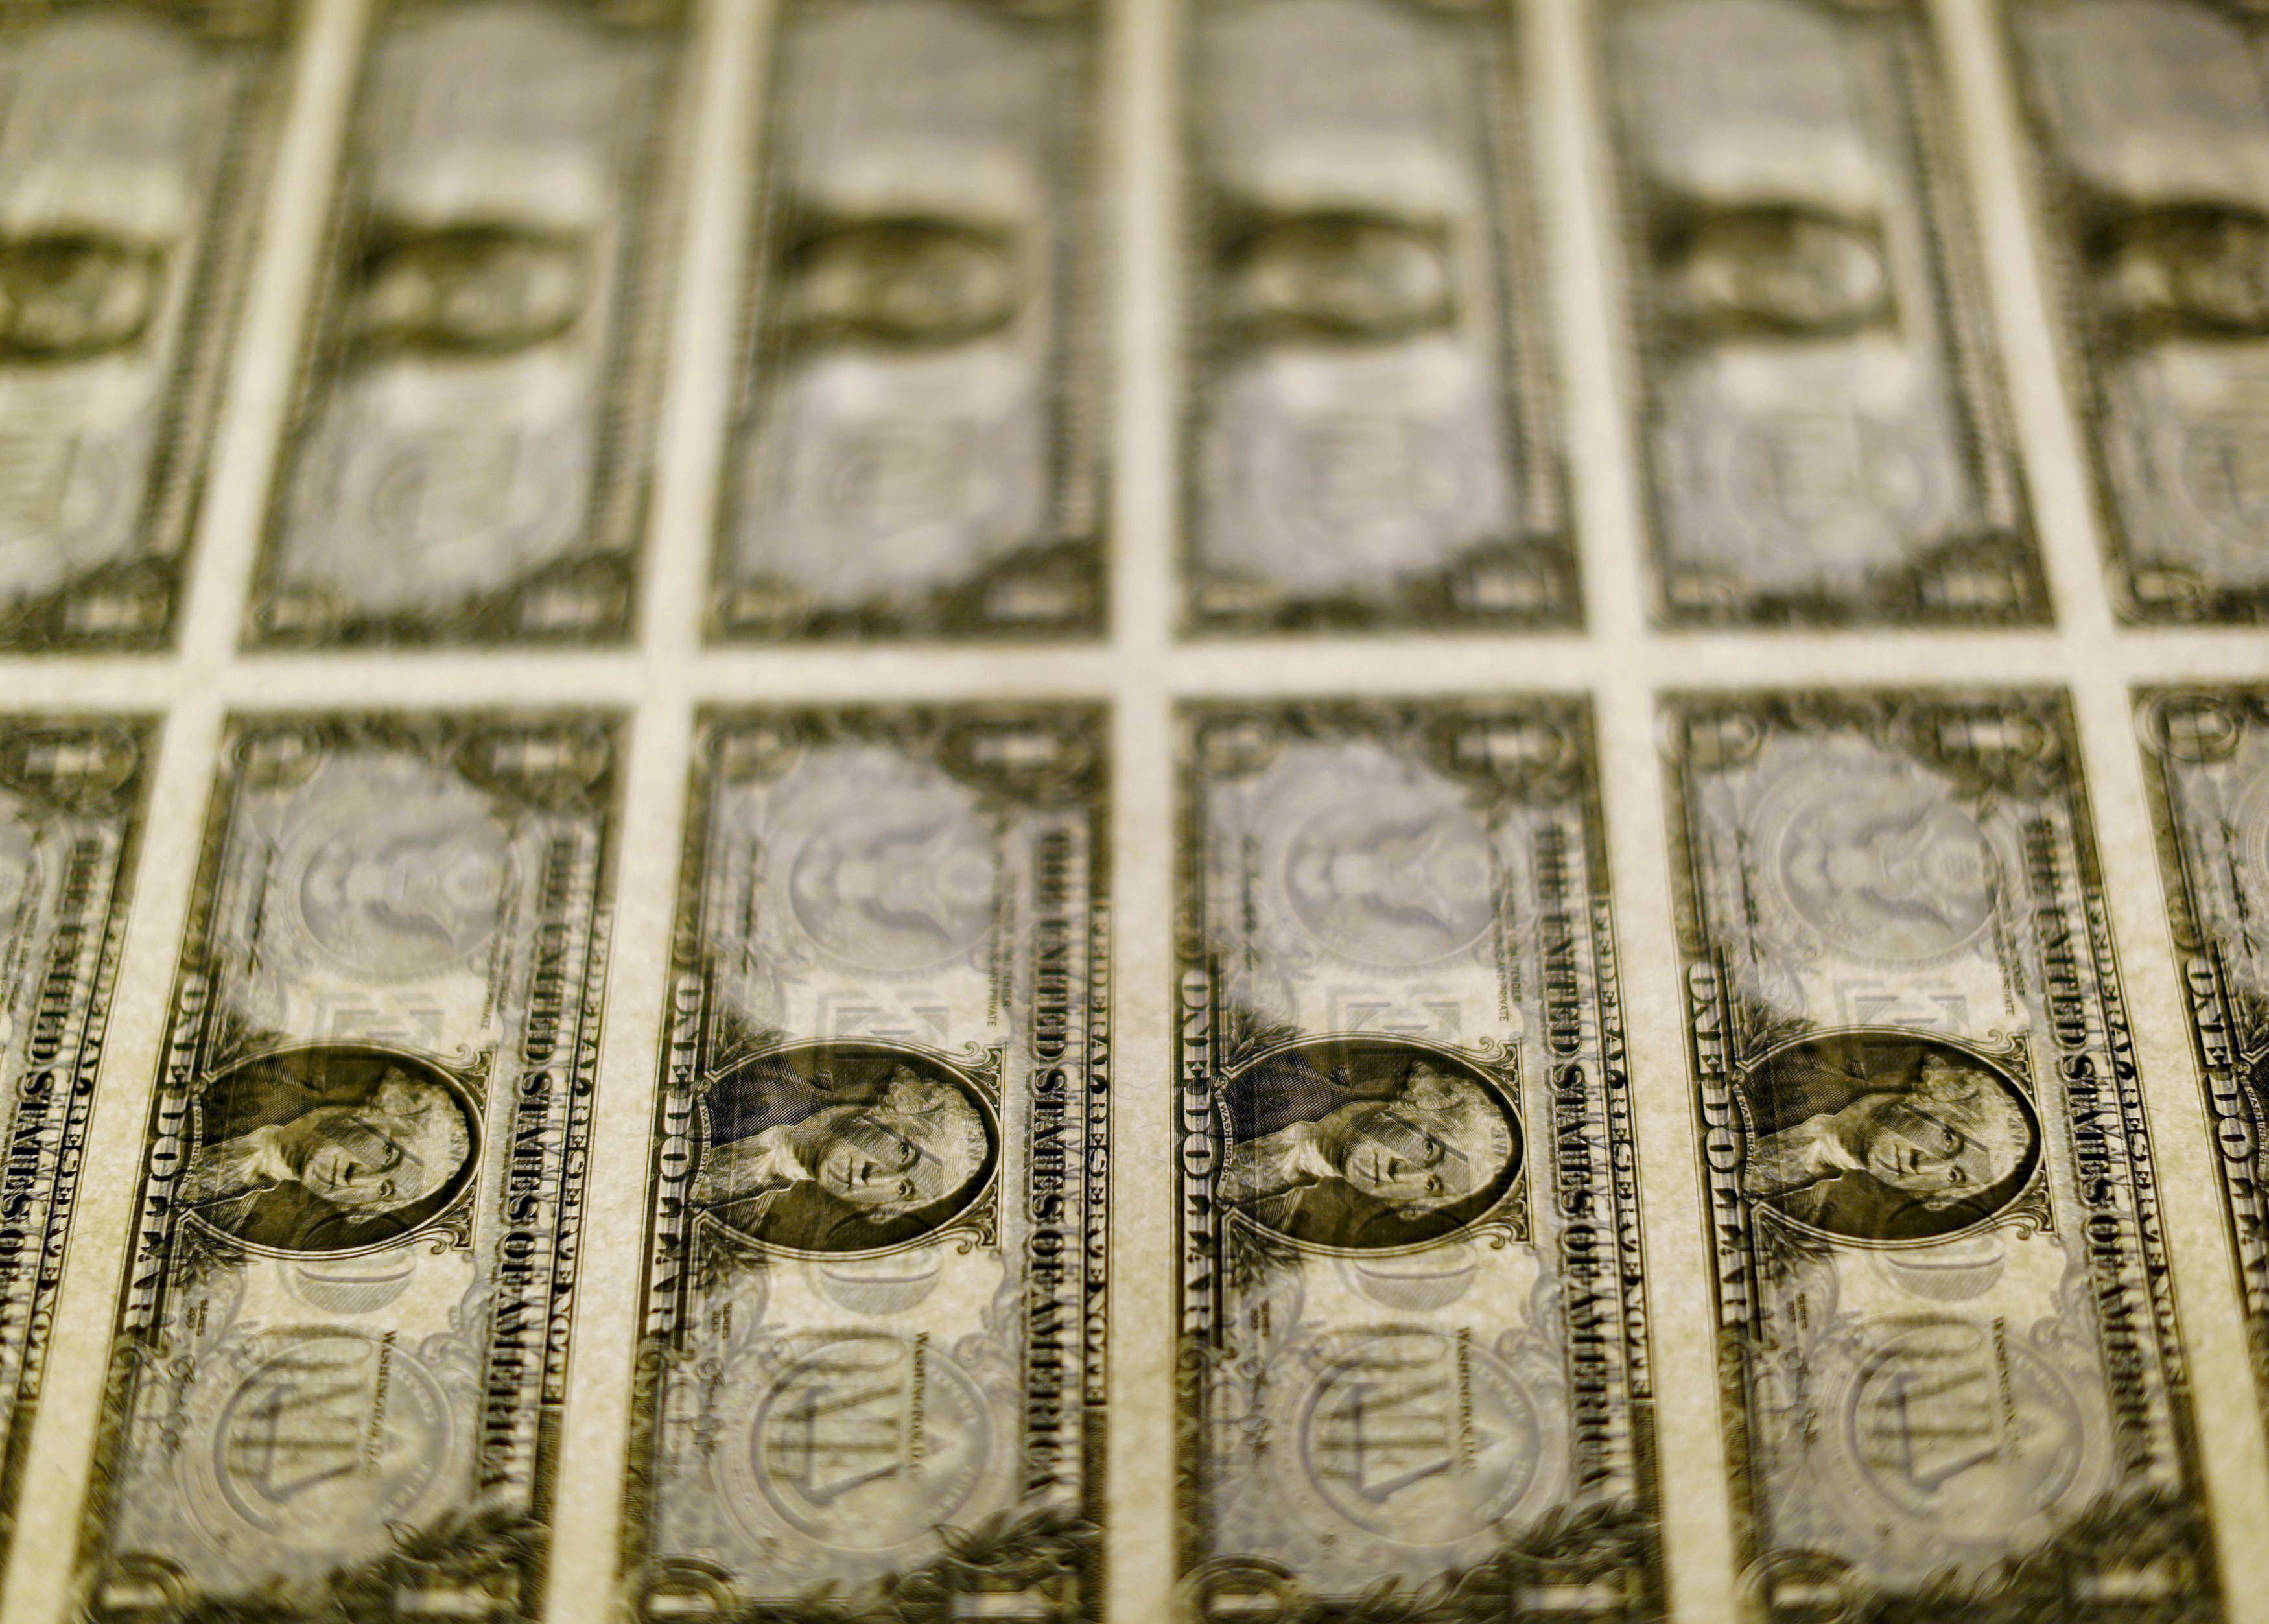 U.S. dollar bills are seen on a light table at the Bureau of Engraving and Printing in Washington